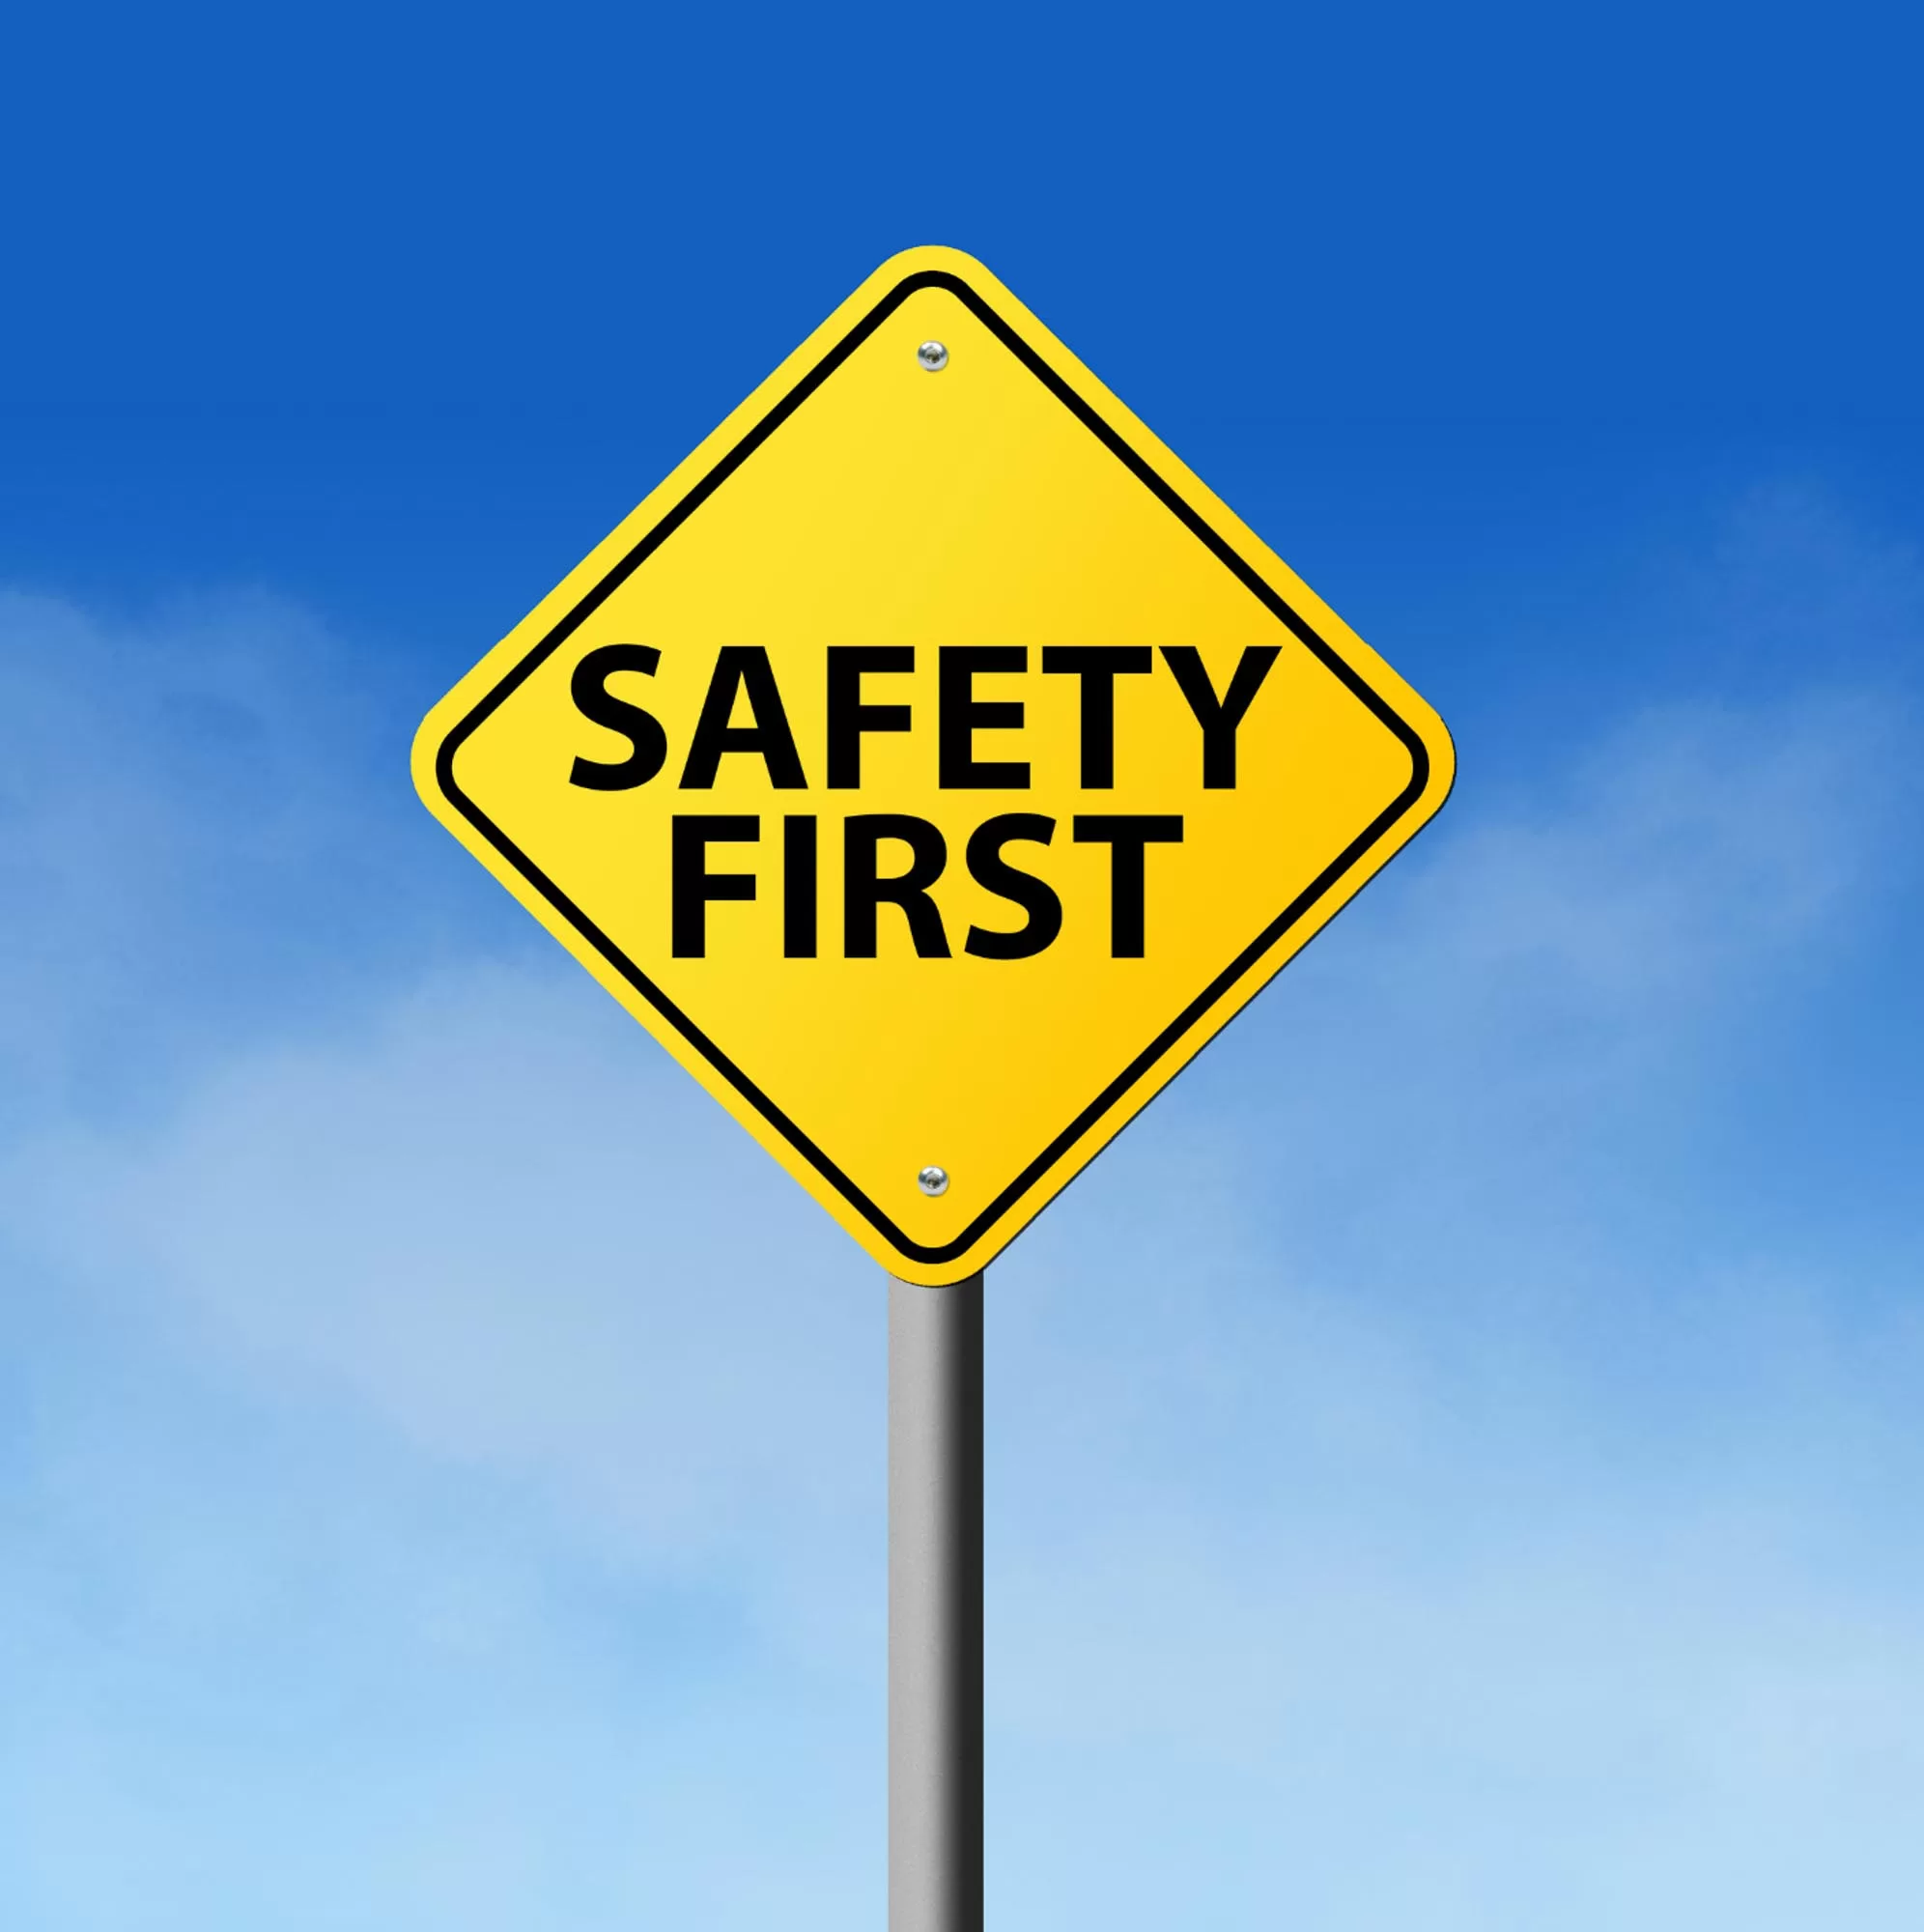 Safety is part of total cost of ownership